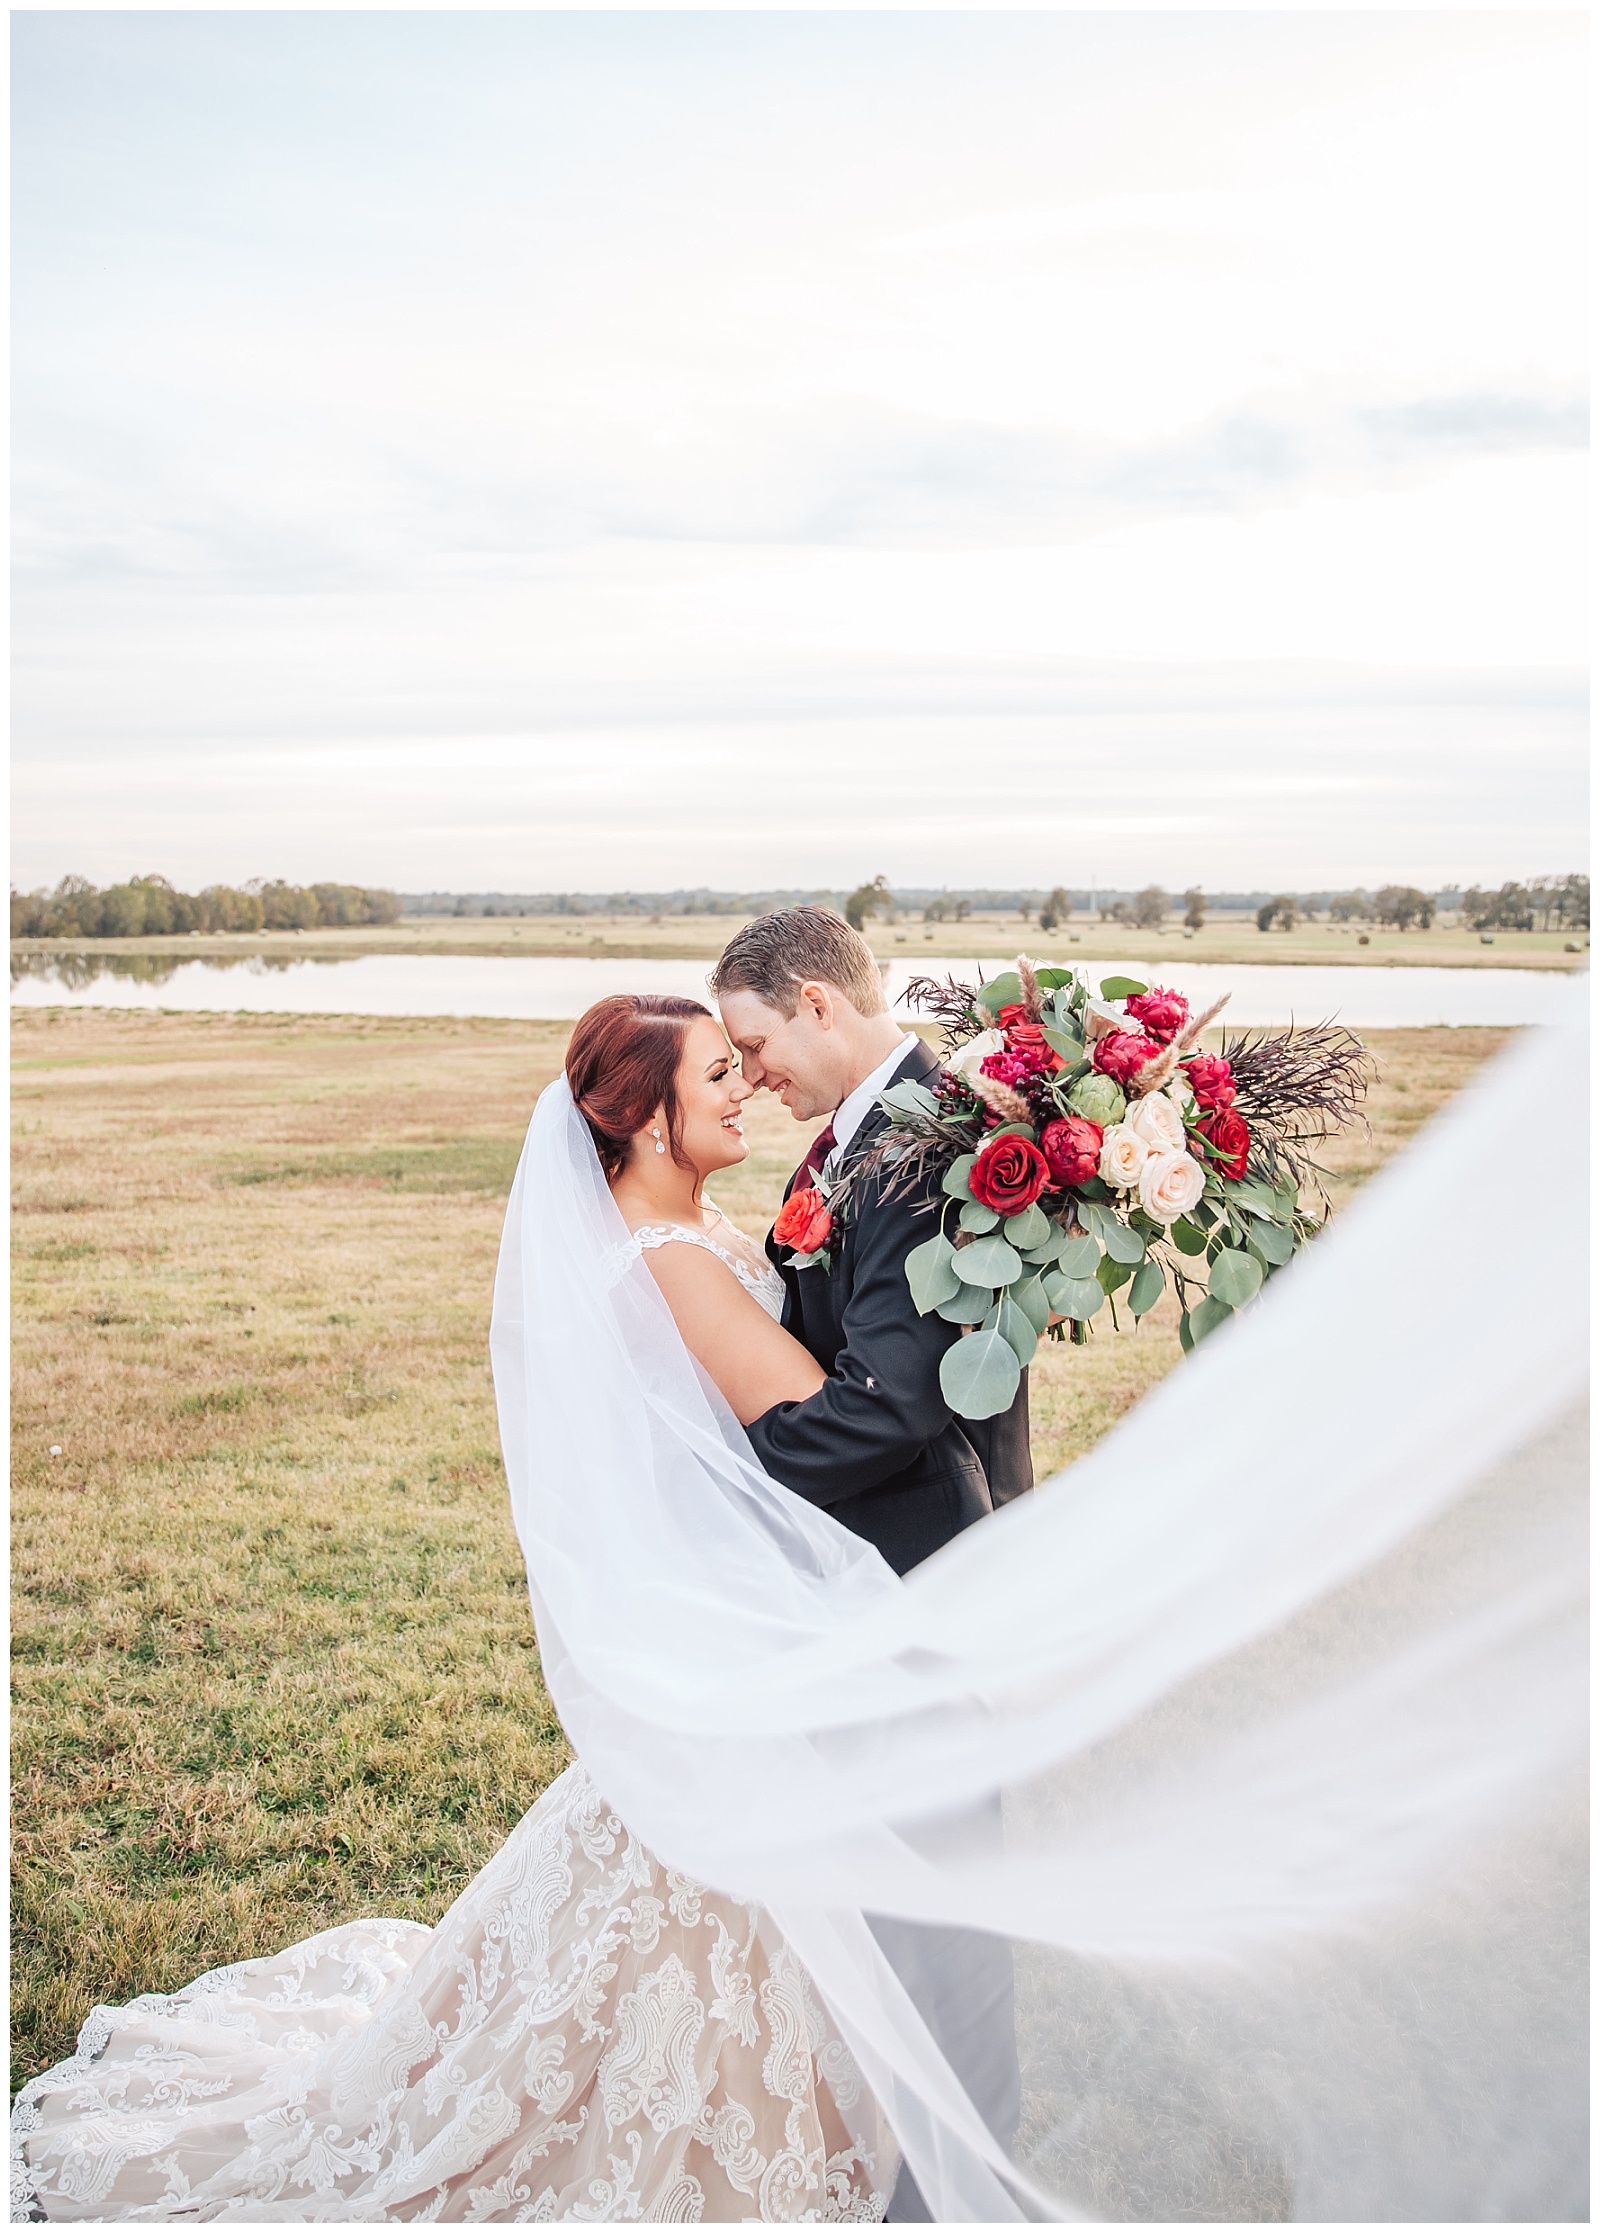 A private moment between the newlyweds at Emery's Buffalo Creek | Glam Burgundy and Blush wedding 